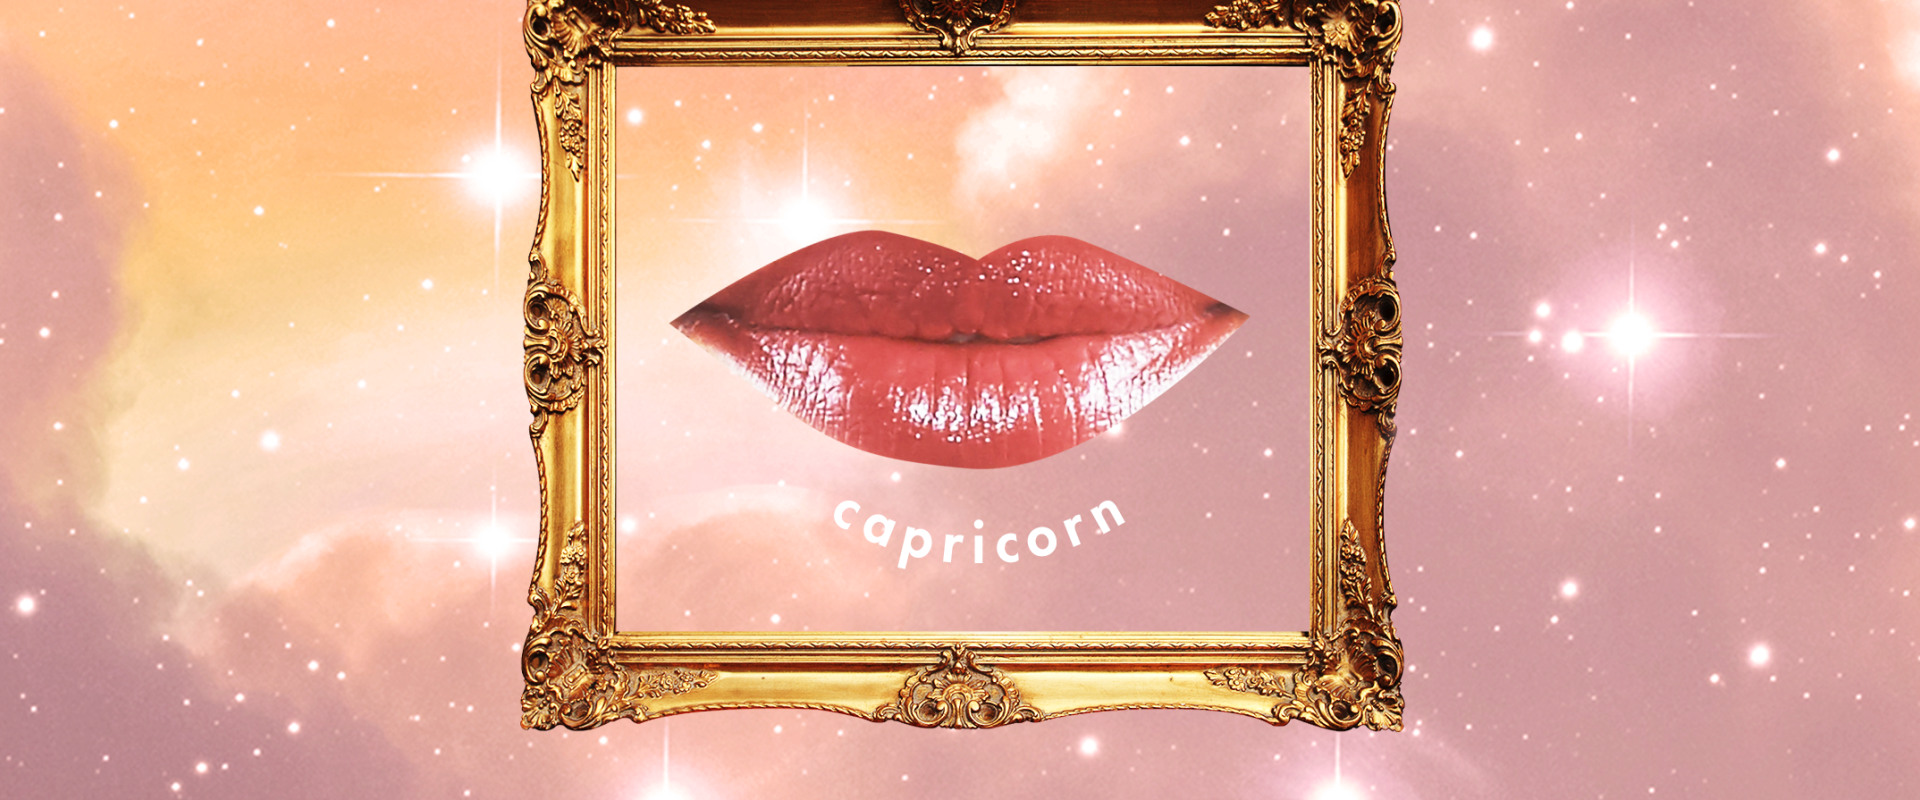 Capricorn Monthly Horoscope: What to Expect This Month